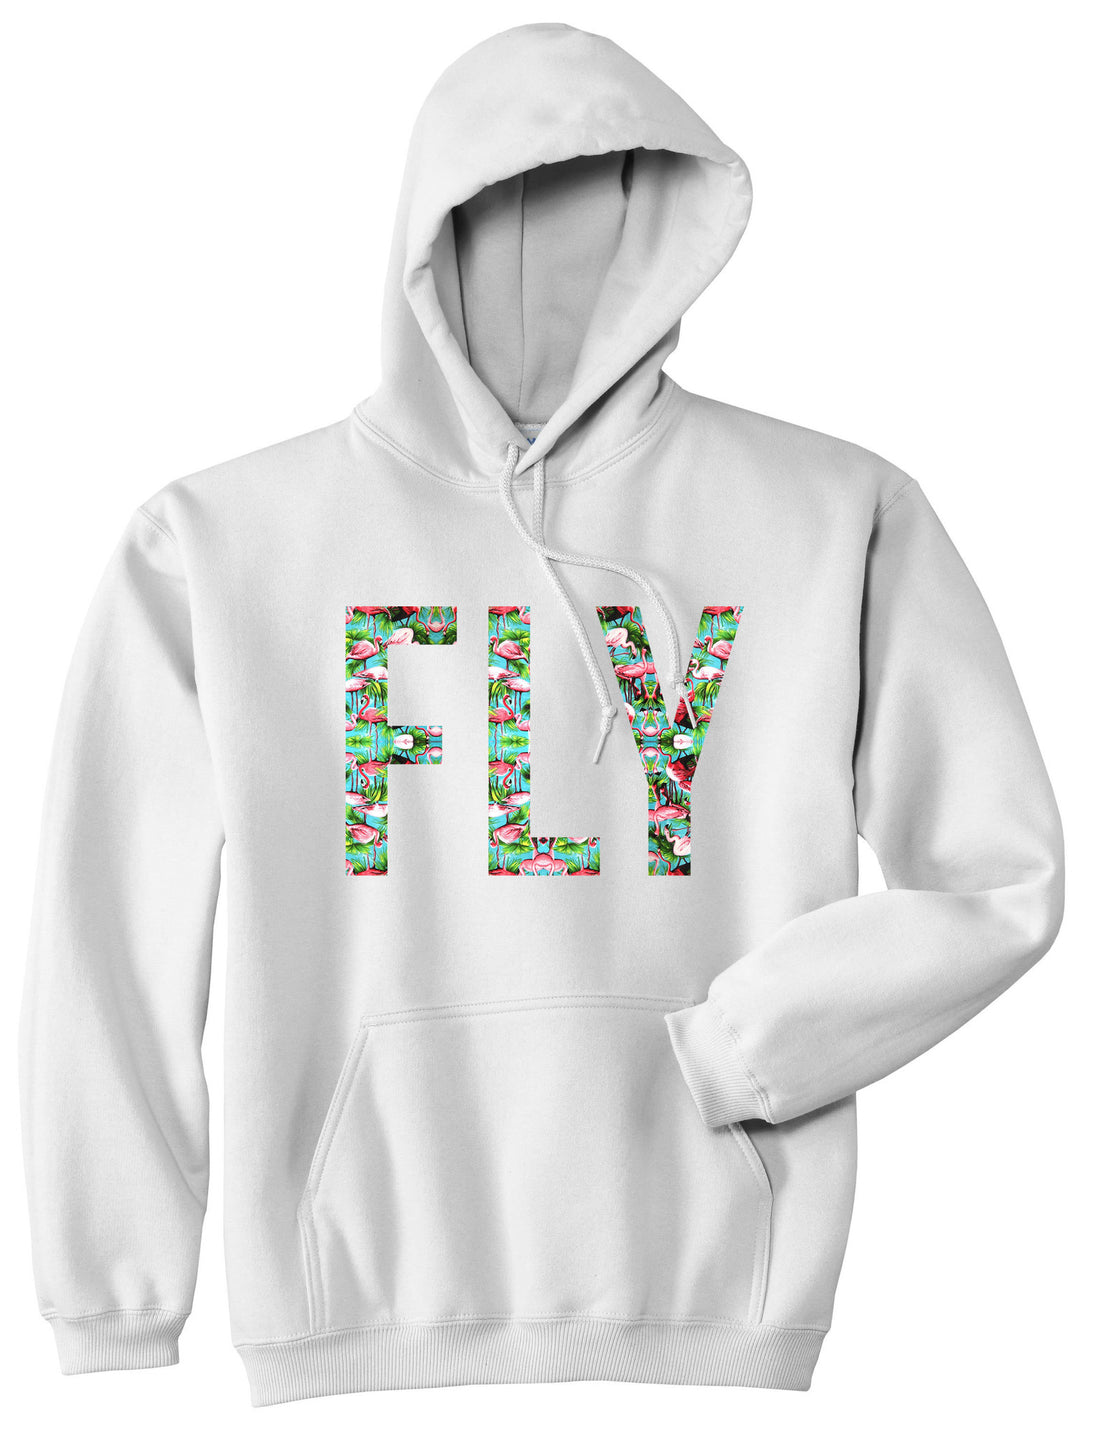 FLY Flamingo Print Summer Wild Society Boys Kids Pullover Hoodie Hoody in White by Kings Of NY